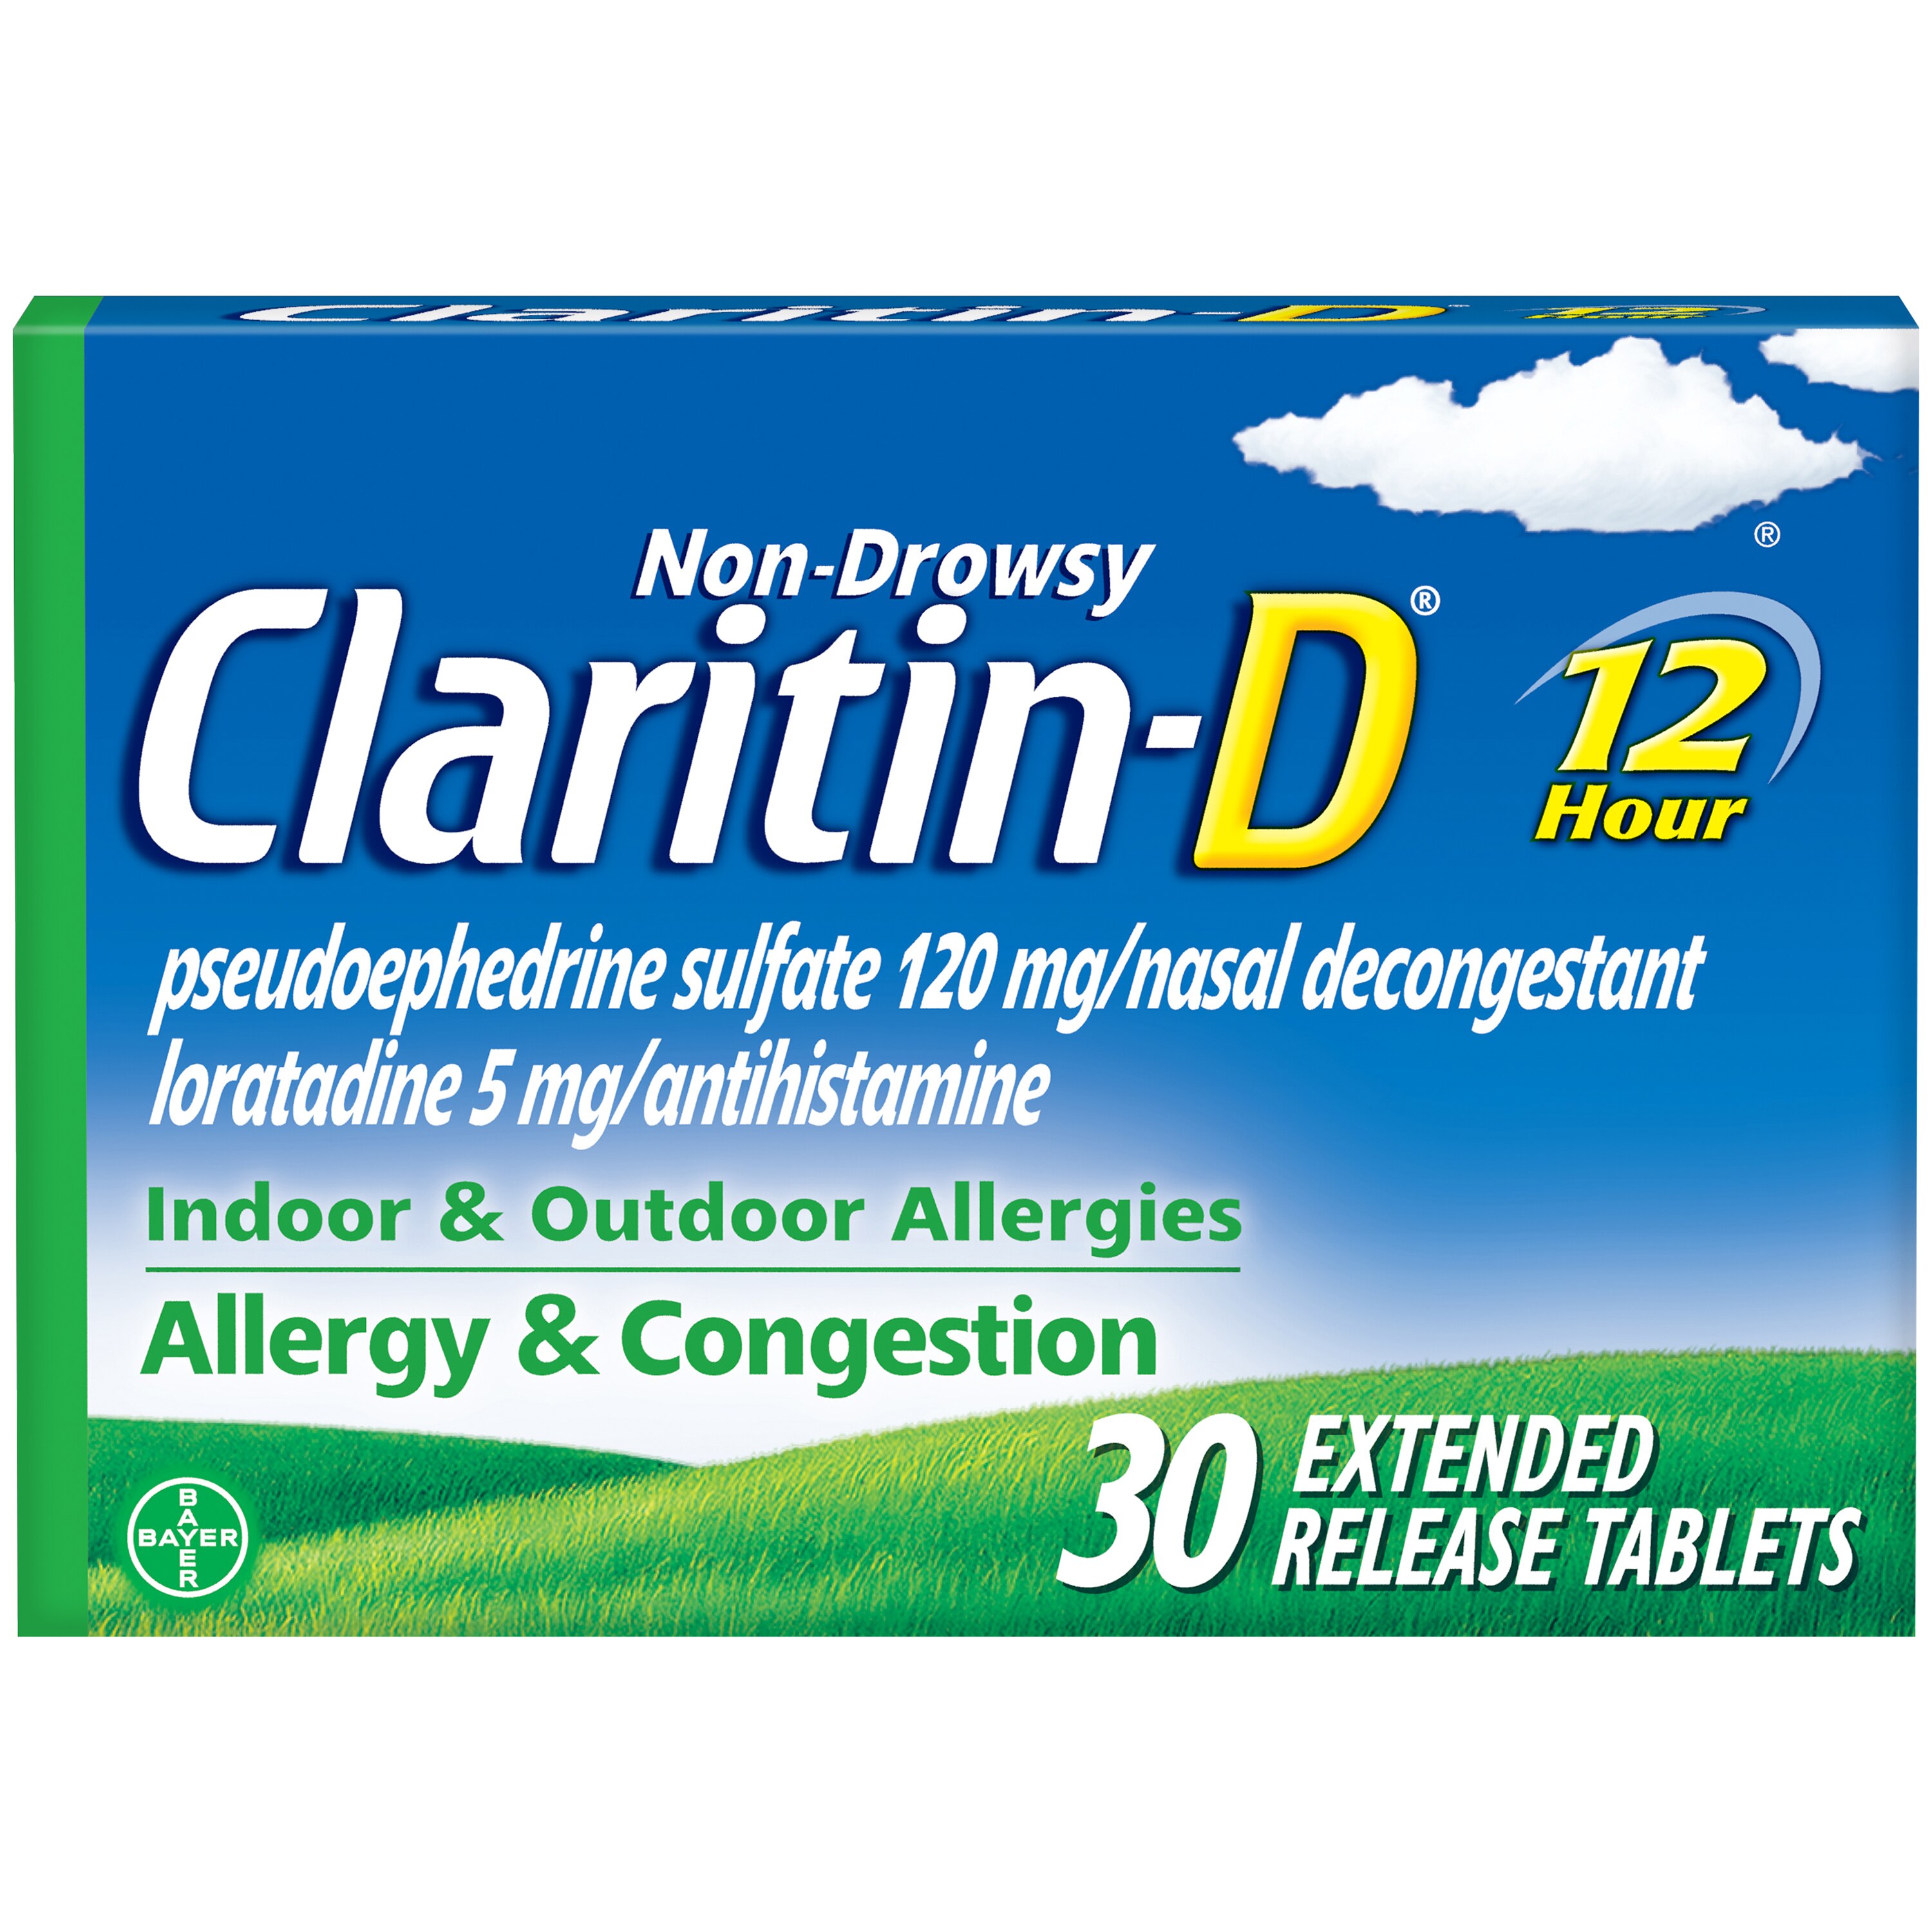 Claritin-D 12 Hour Non-Drowsy Allergy Medicine, Powerful Relief, Nasal Congestion & Sinus Pressure Relief, Indoor And Outdoor Allergy Relief, 30 Ct